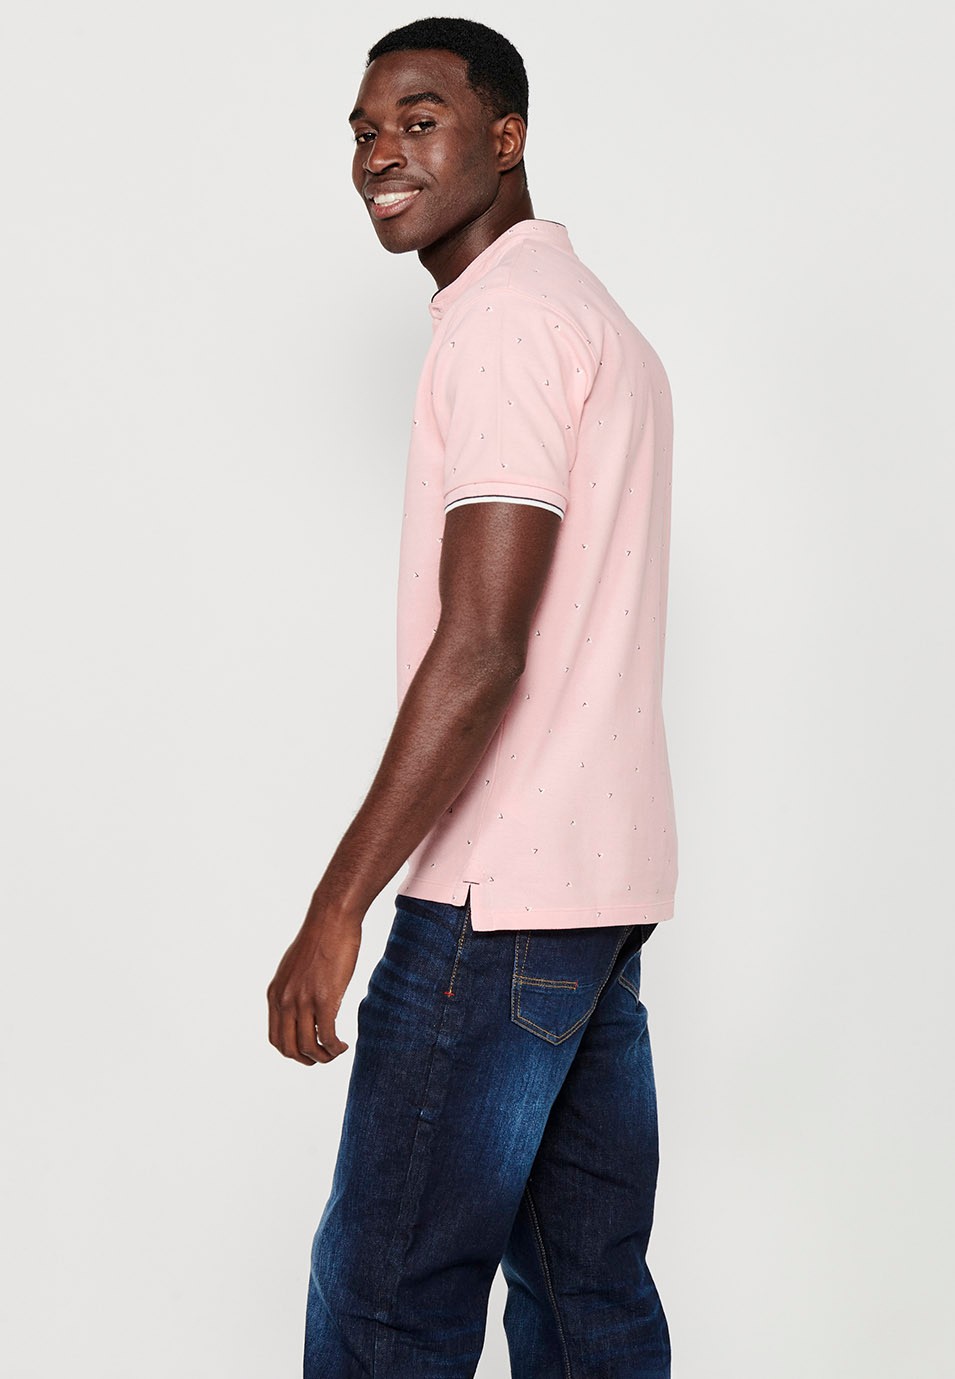 Short-sleeved Cotton Polo with Round Neck with buttoned opening and Finished with Side Cuts in Pink for Men 7